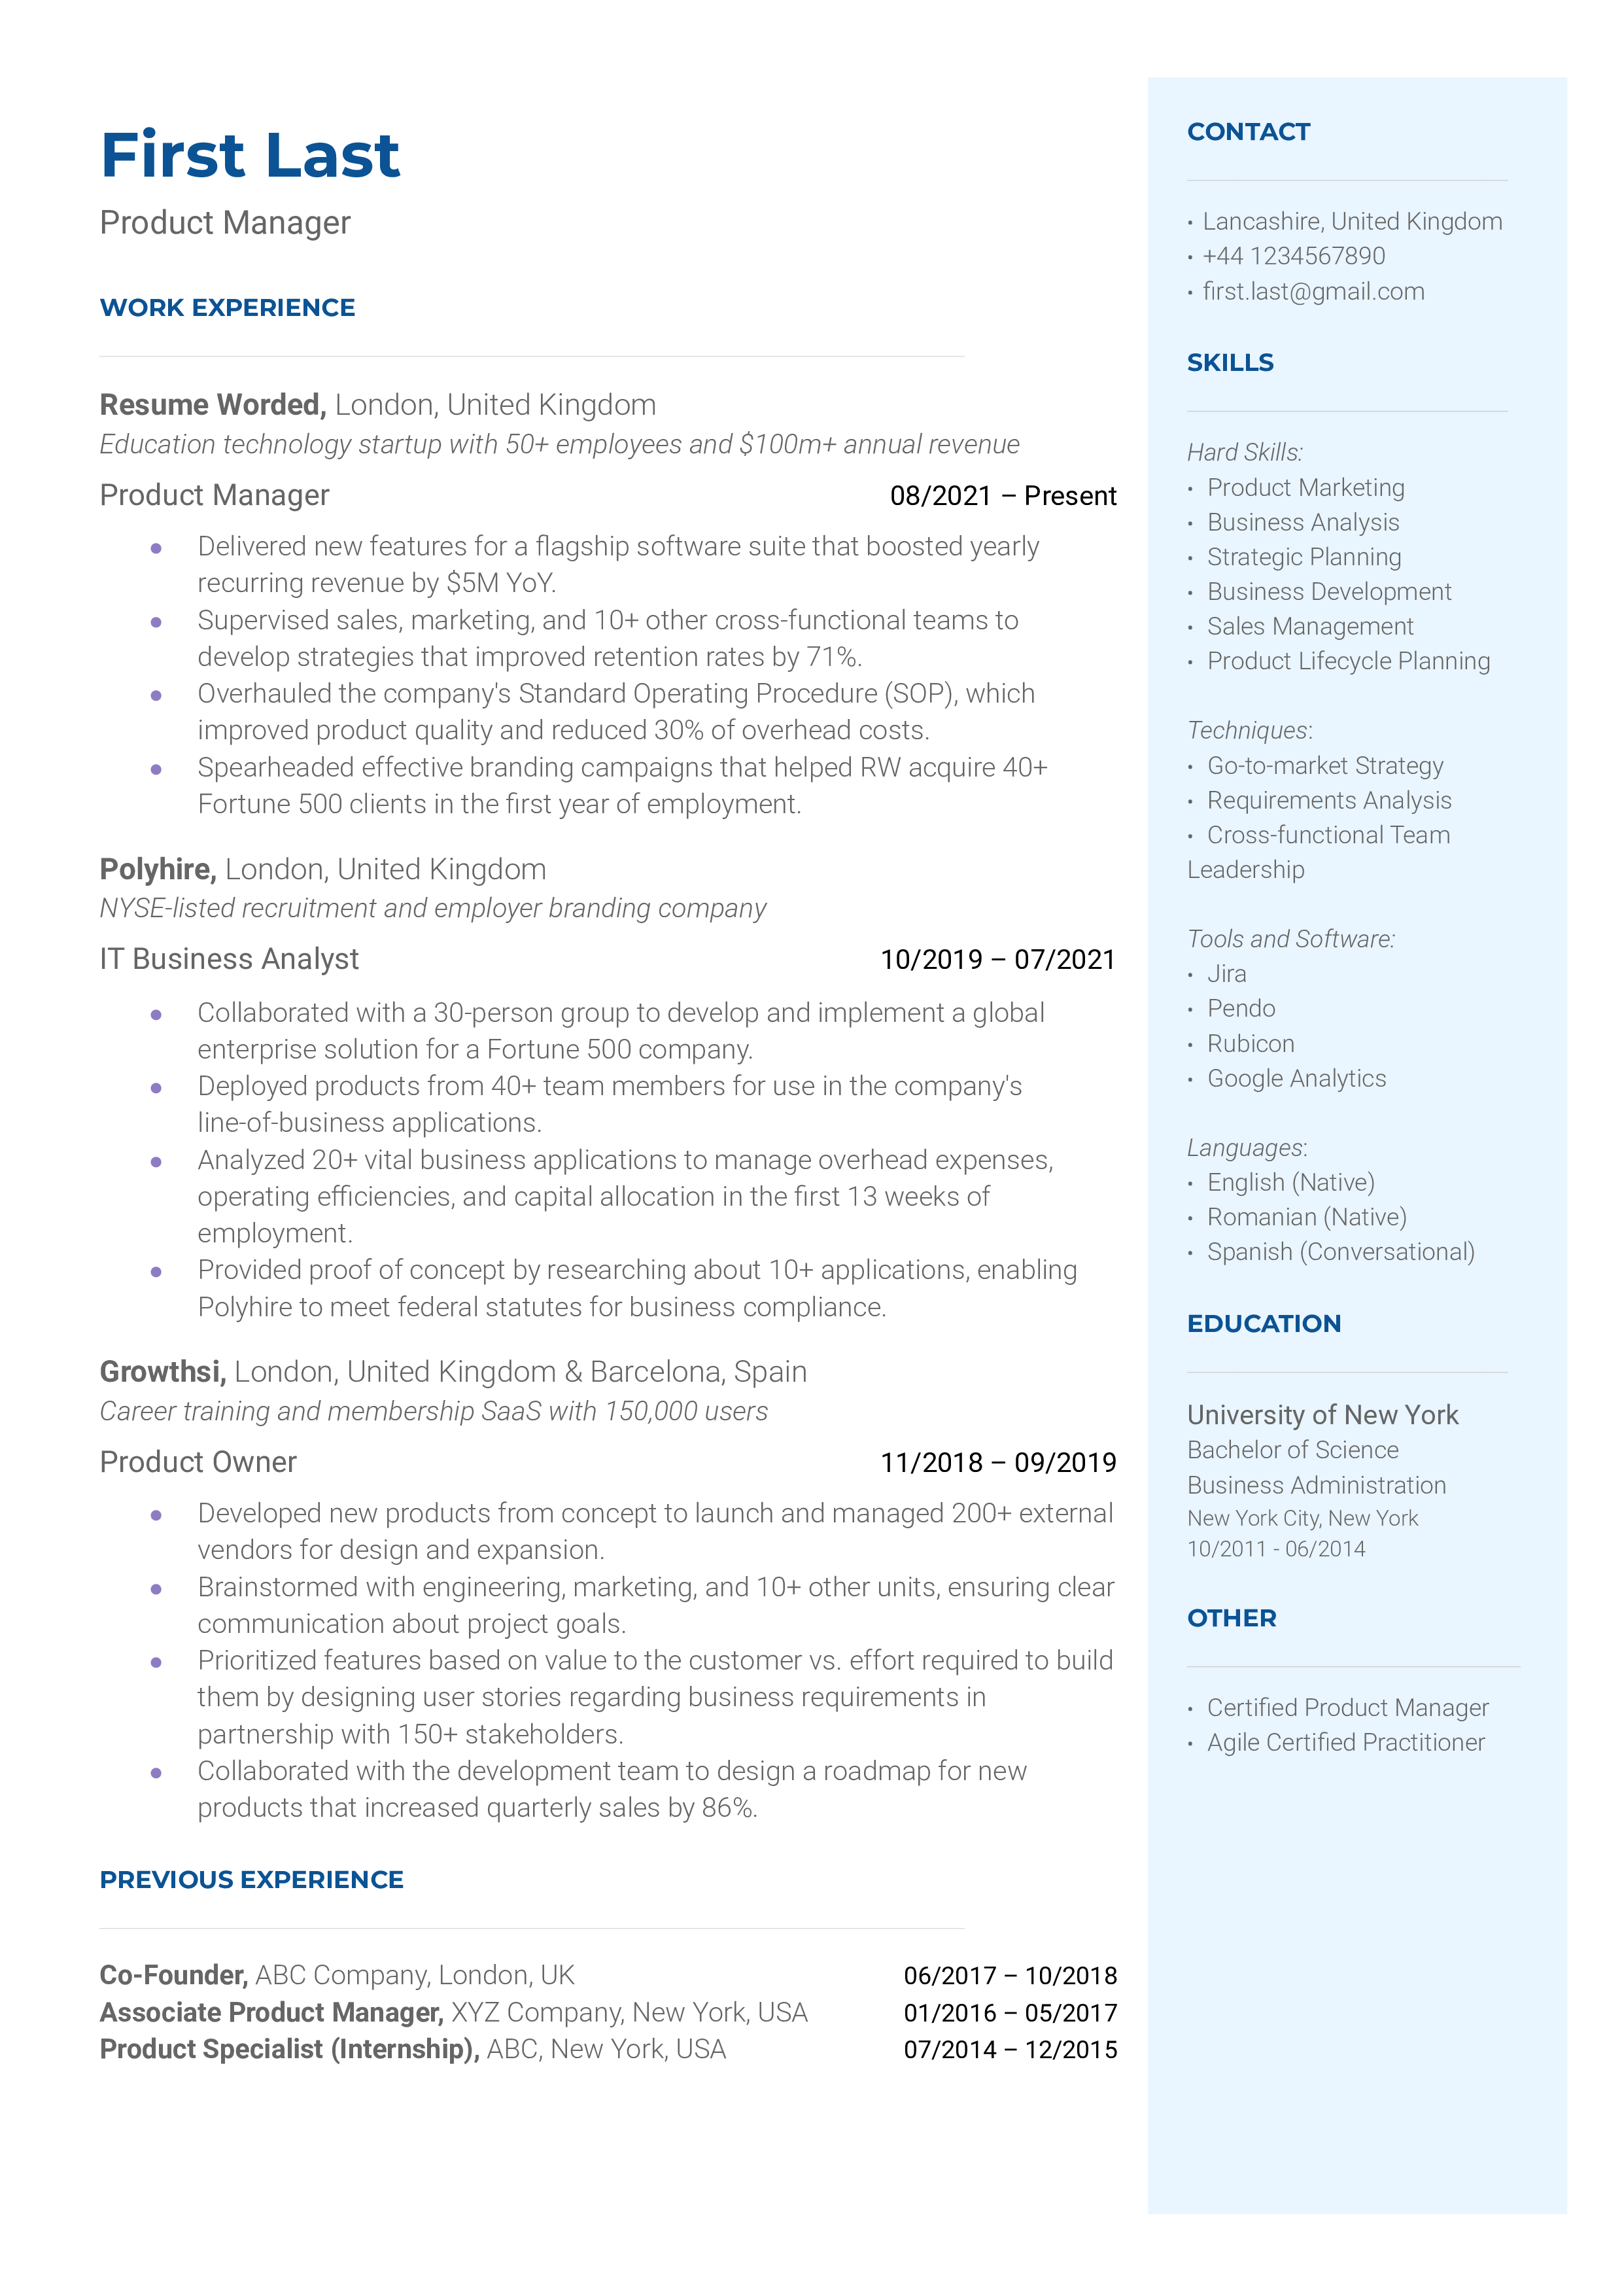 A well-structured CV showcasing technical skills and leadership abilities of a Product Manager.